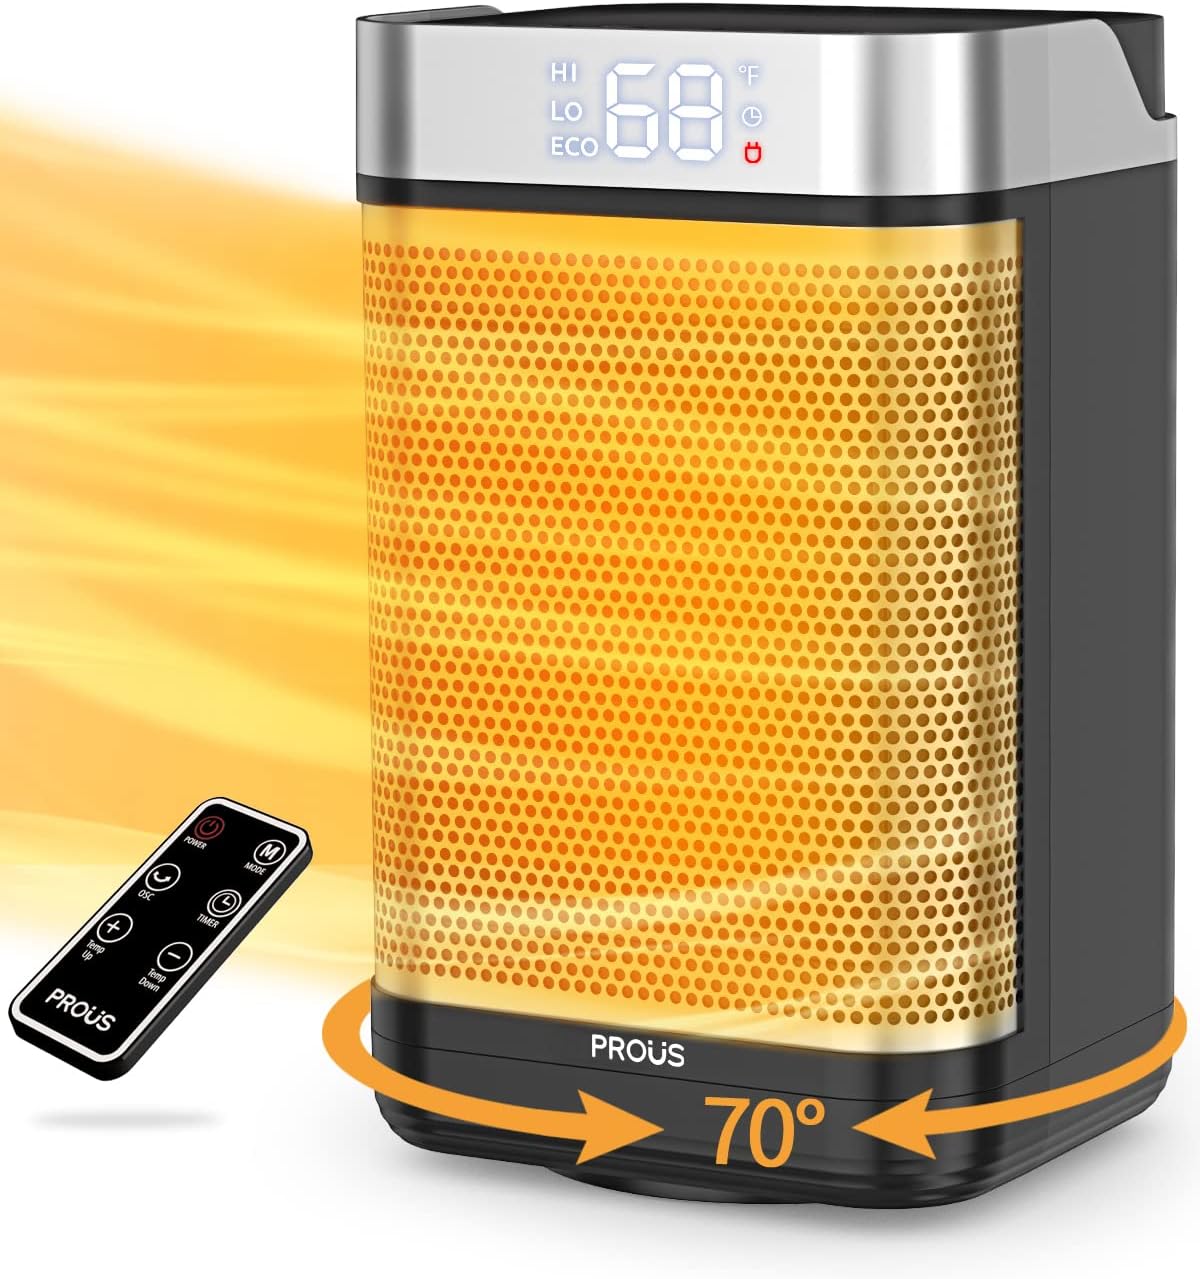 PROUS Space Heaters for Indoor Use, Portable Heater for Bedroom, Small Heater with 70°Oscillation, 1500W Ceramic Electric Heater with Thermostat, Fast Safety Heat, Remote, 1-12h Timer